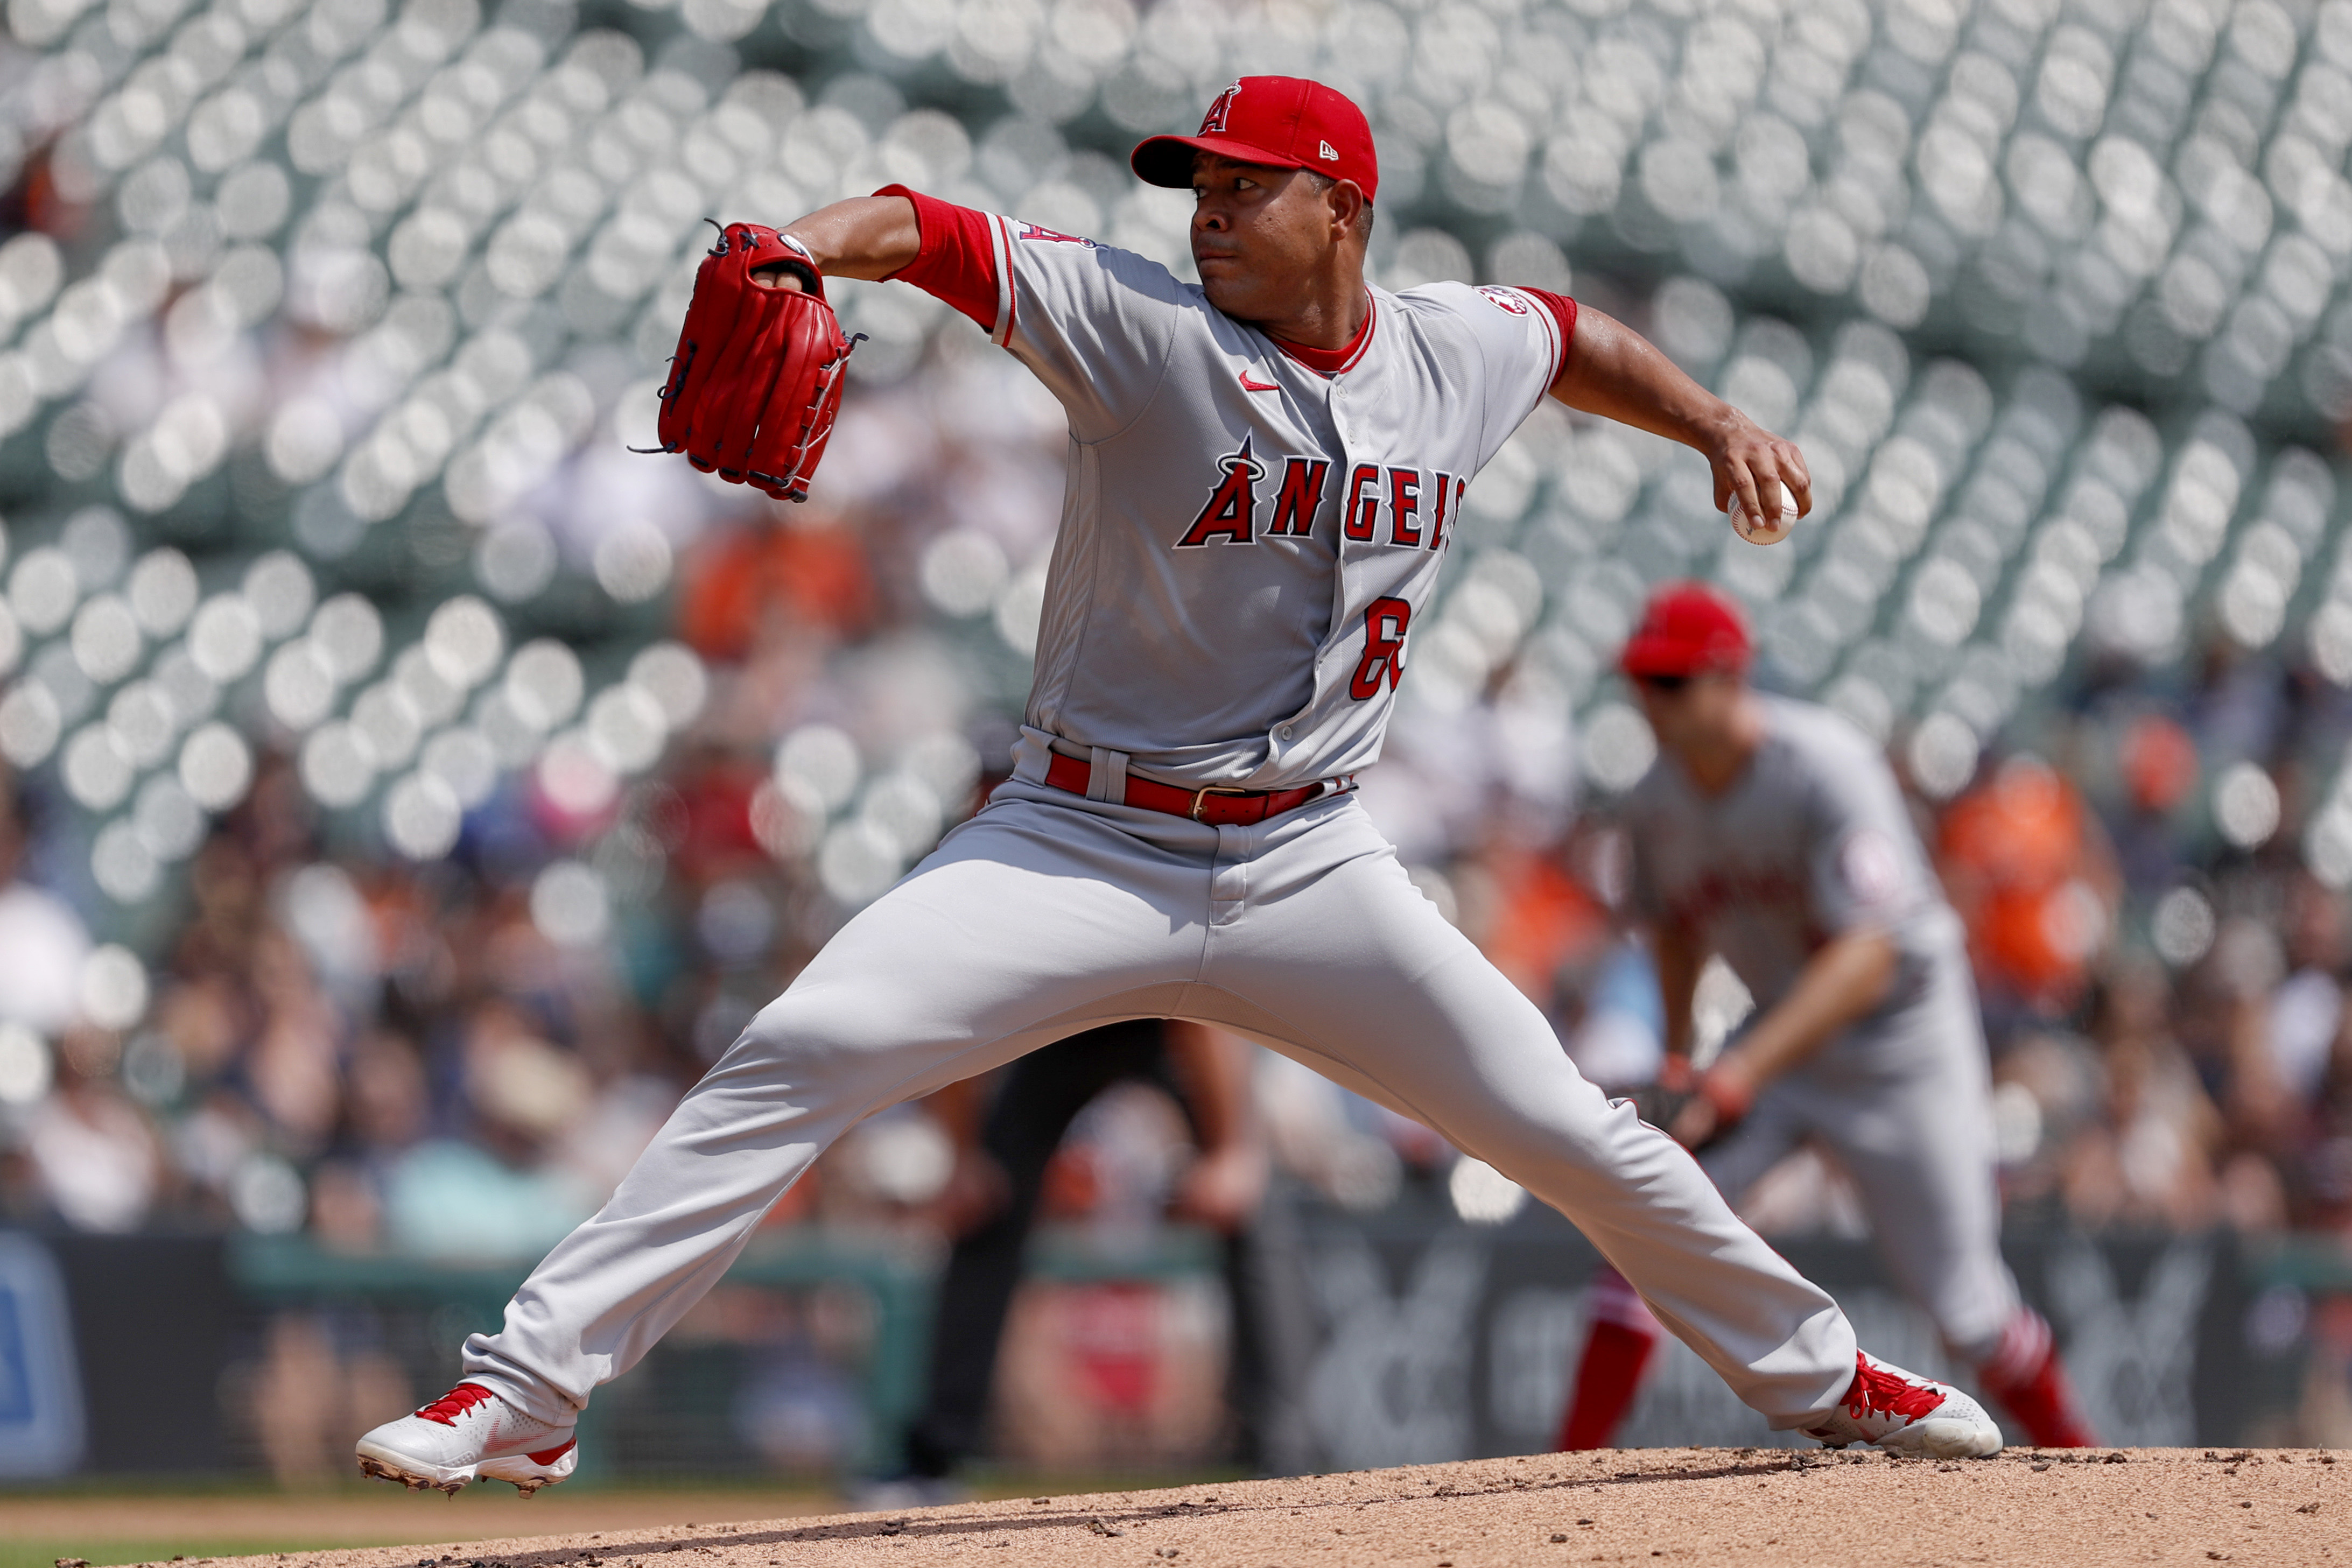 Aug 19, 2021; Detroit, Michigan, USA; Los Angeles Angels starting pitcher Jose Quintana (62) throws during the first inning against the Detroit Tigers at Comerica Park. Mandatory Credit: Raj Mehta-USA TODAY Sports